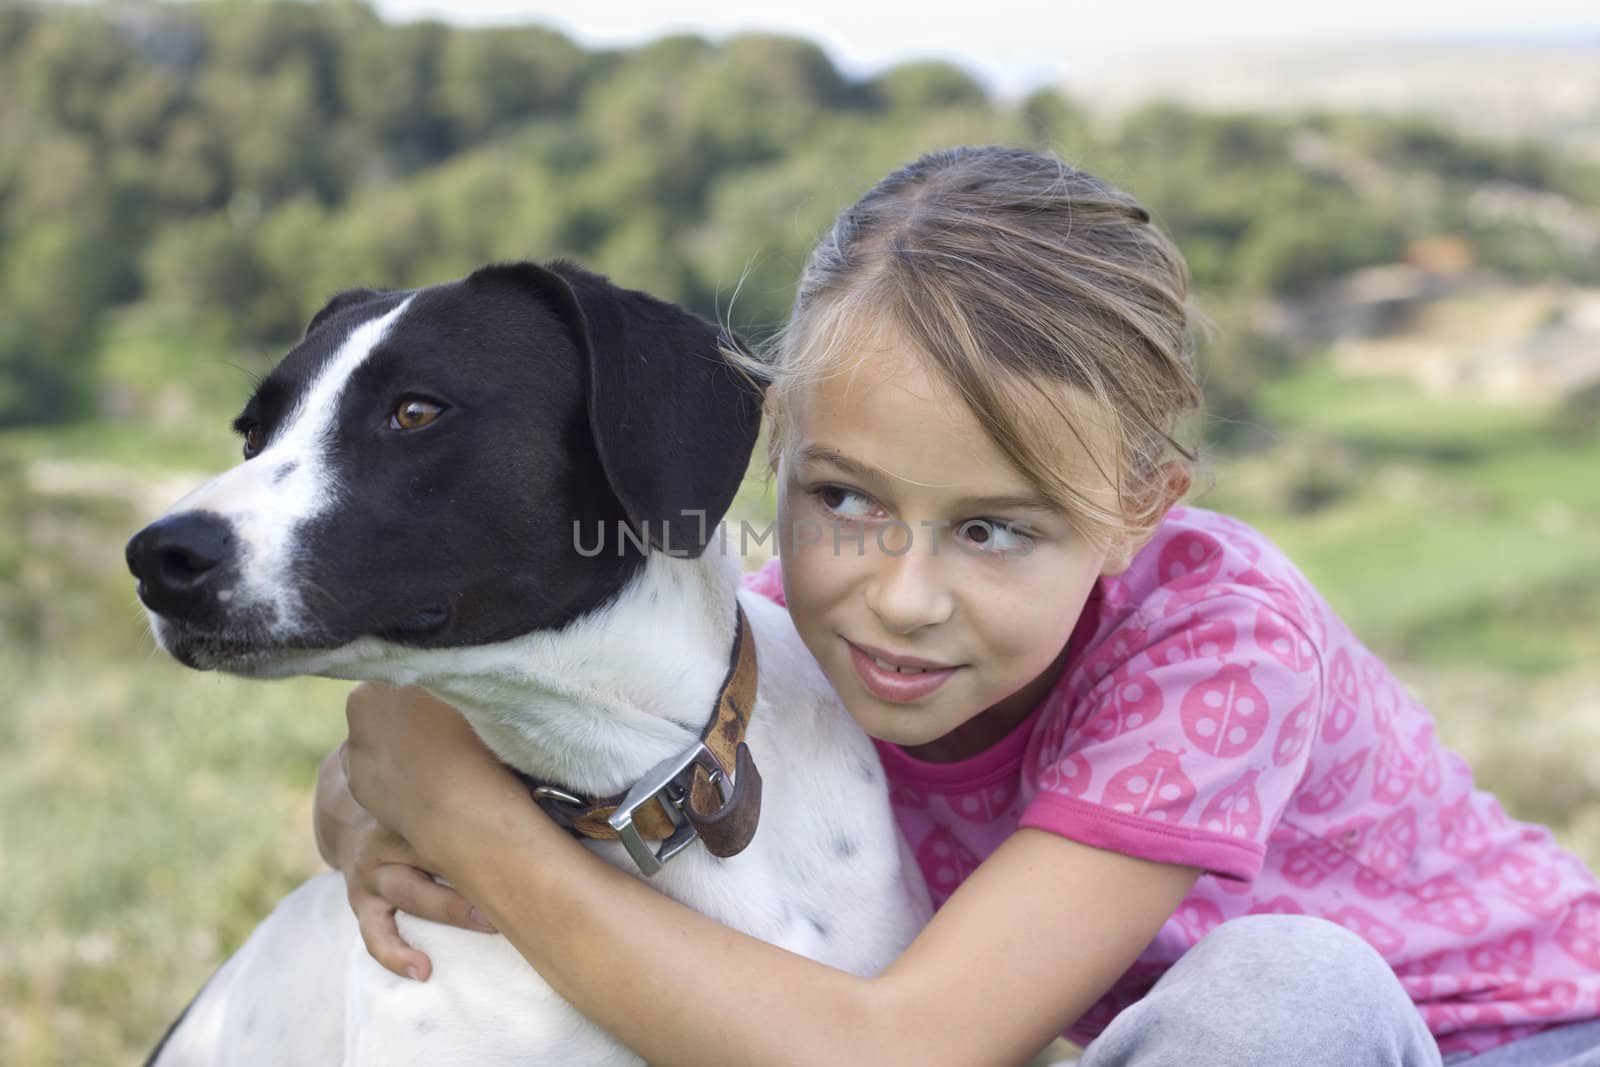 10 year old girl together with her dog